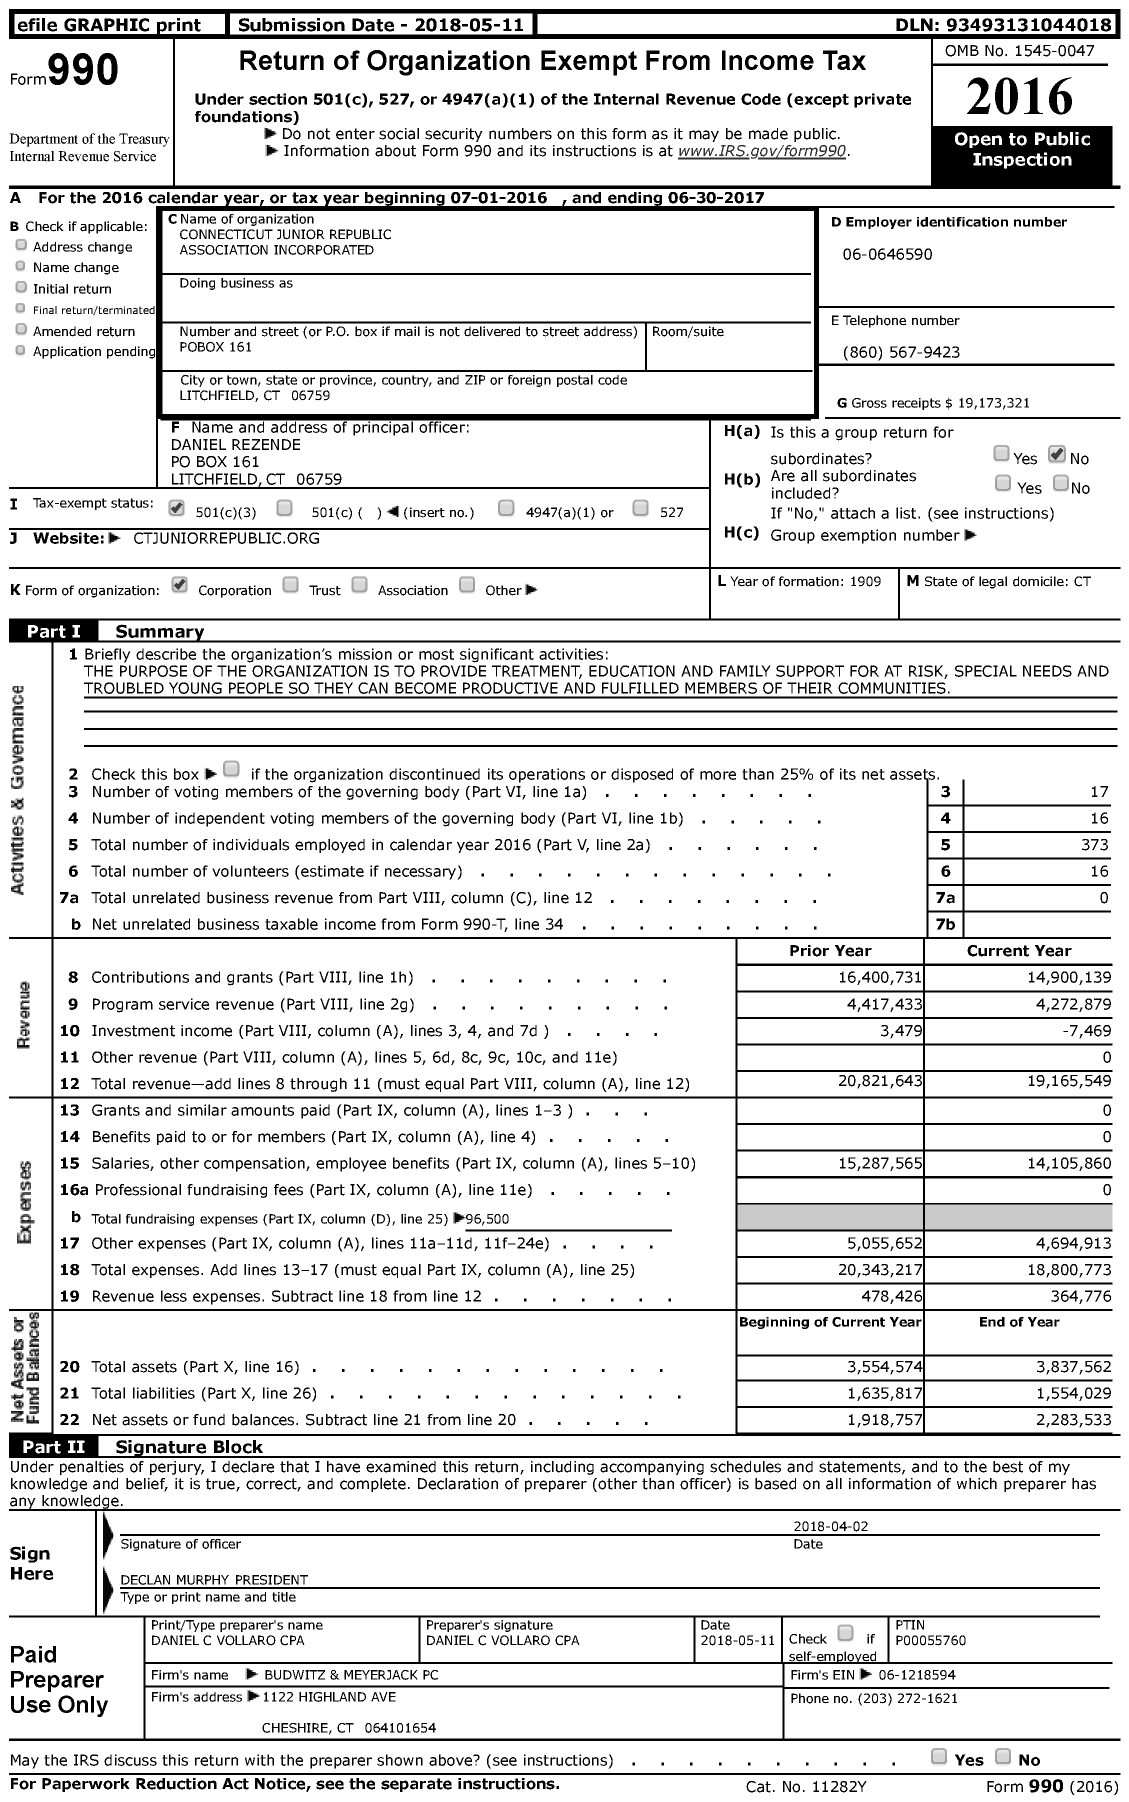 Image of first page of 2016 Form 990 for Connecticut Junior Republic Association Incorporated